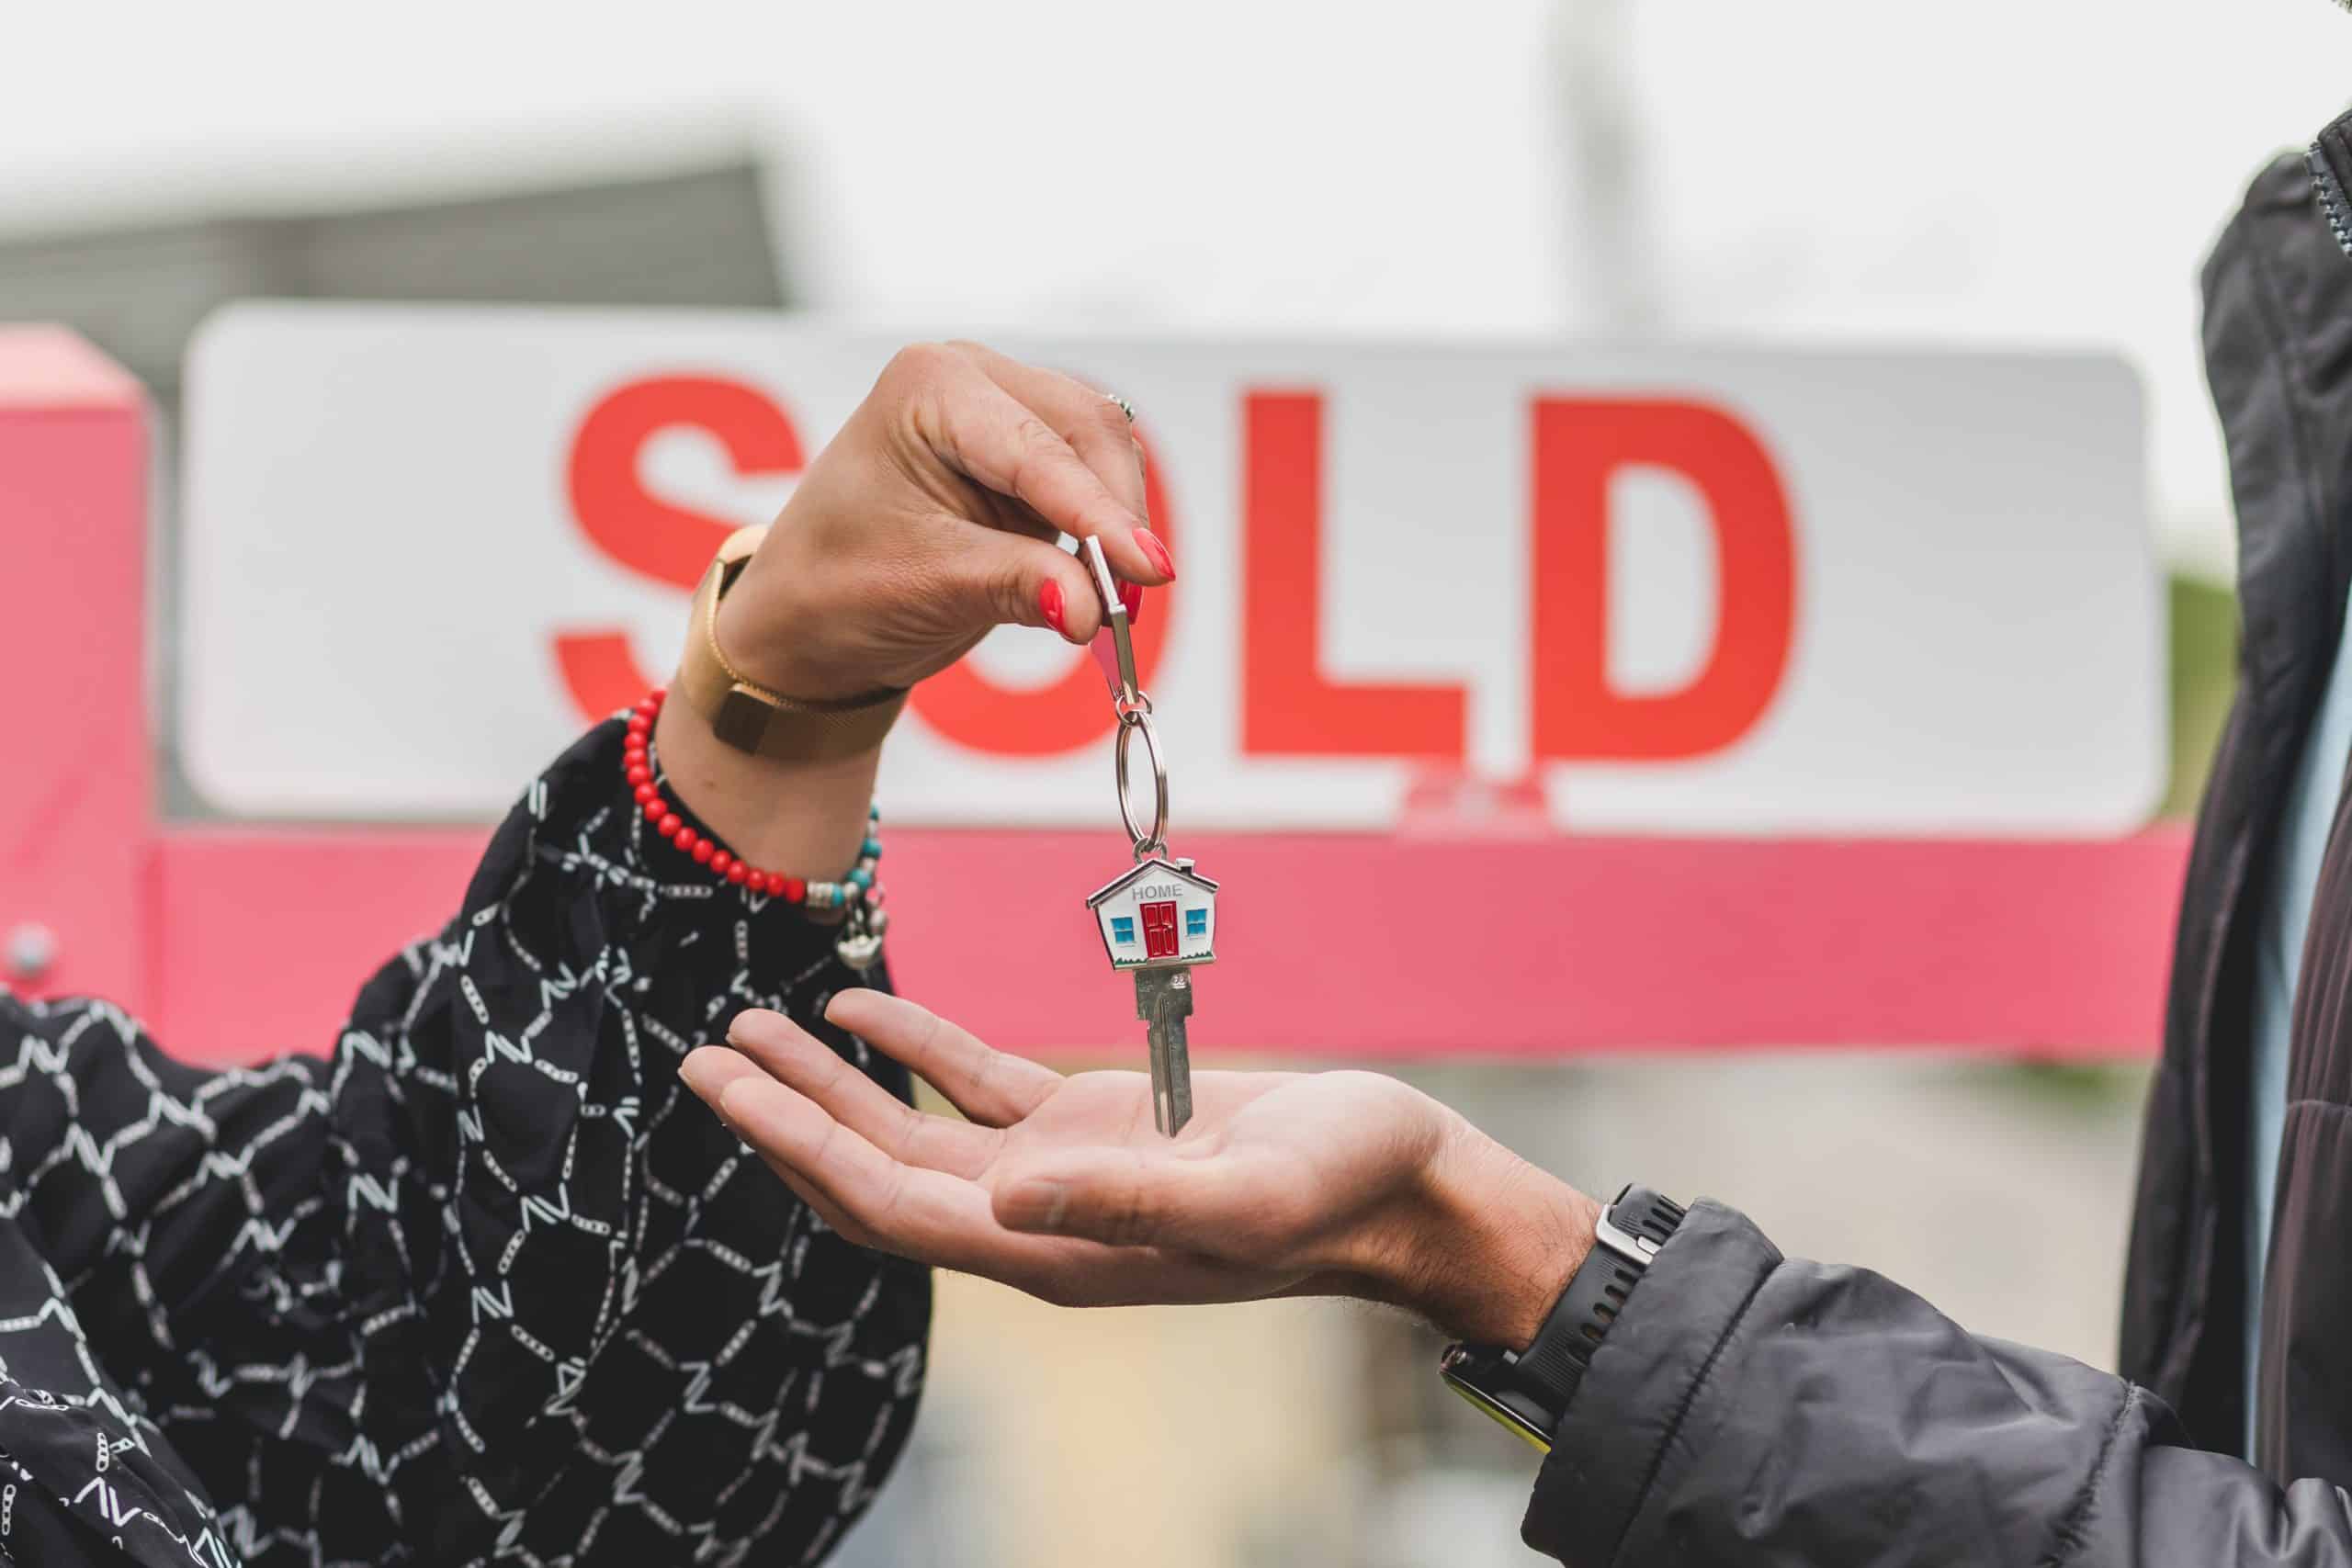 a person holding a set of keys in front of sold sign